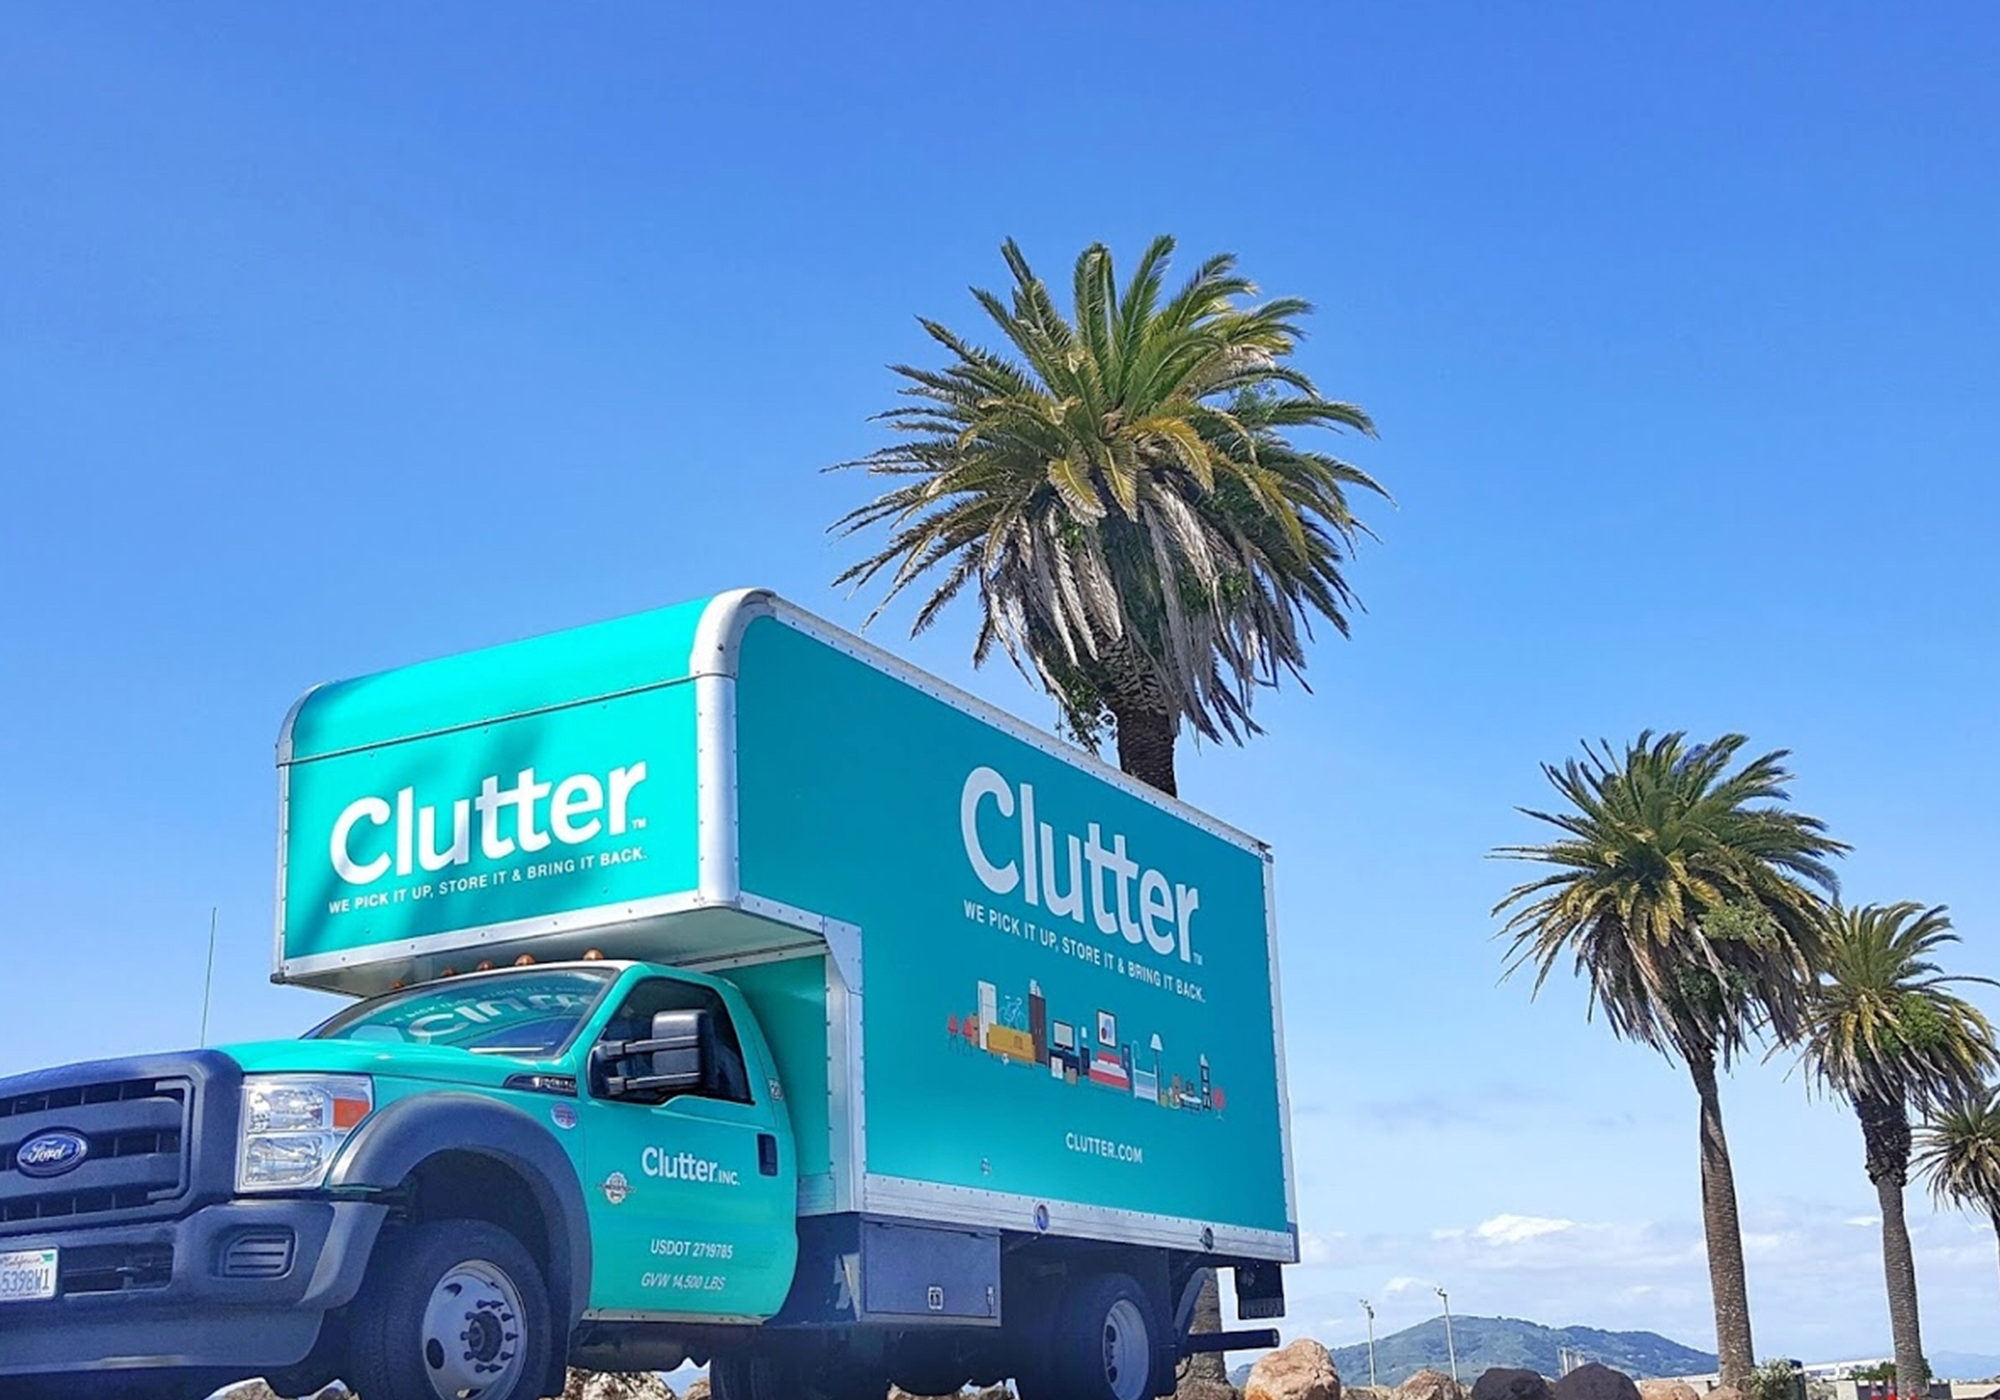 Clutter truck driving through an area with palm trees and mountains in the distance